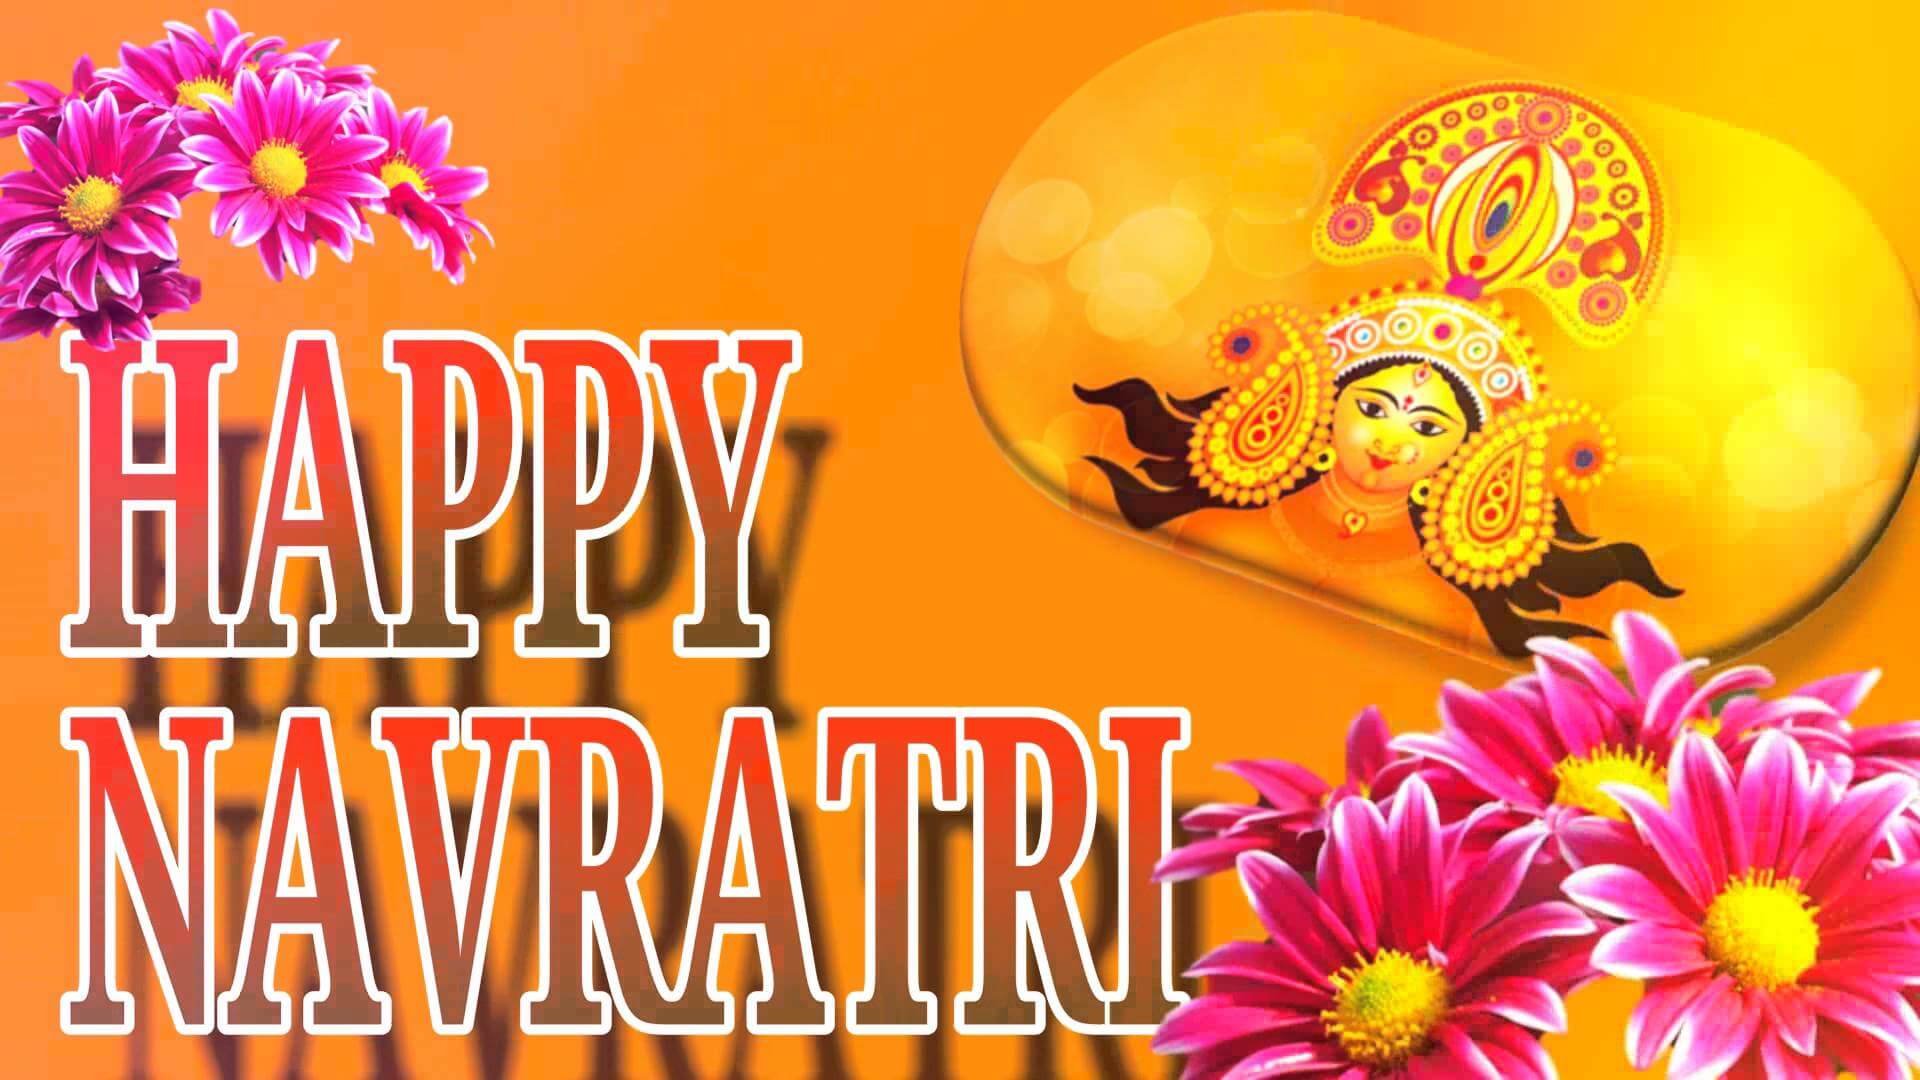 Happy-Navratri-Wishes-Images-2018